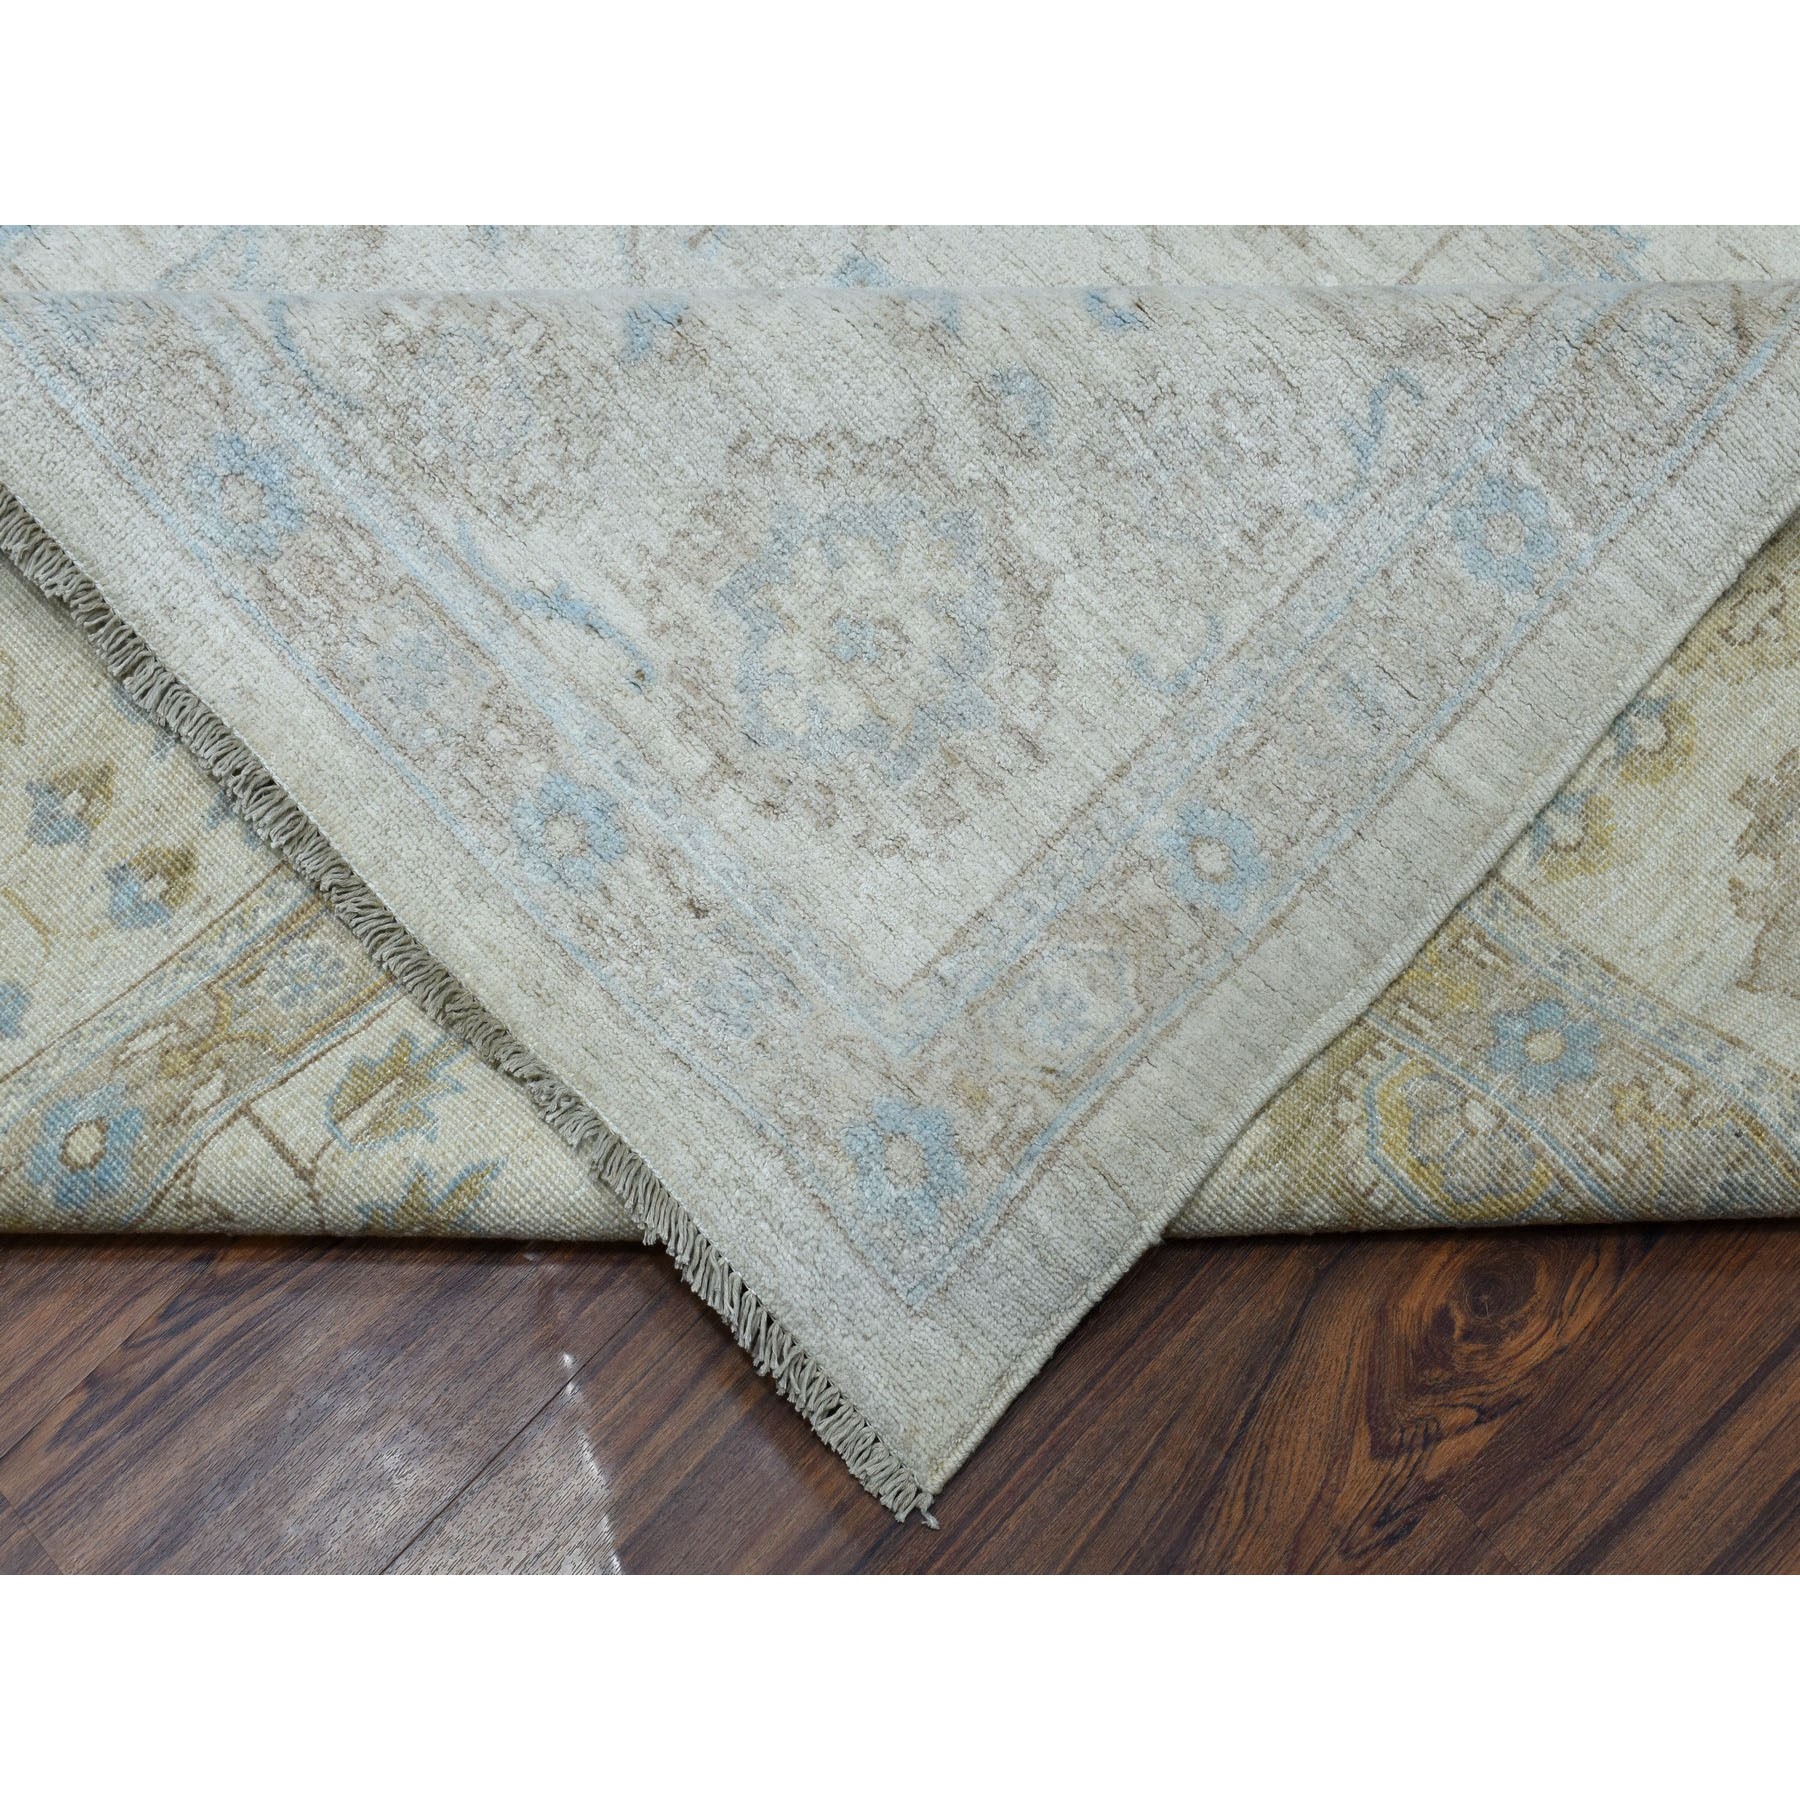 10-1 x14- White Wash Peshawar Pure Wool Hand Knotted Oriental Rug 